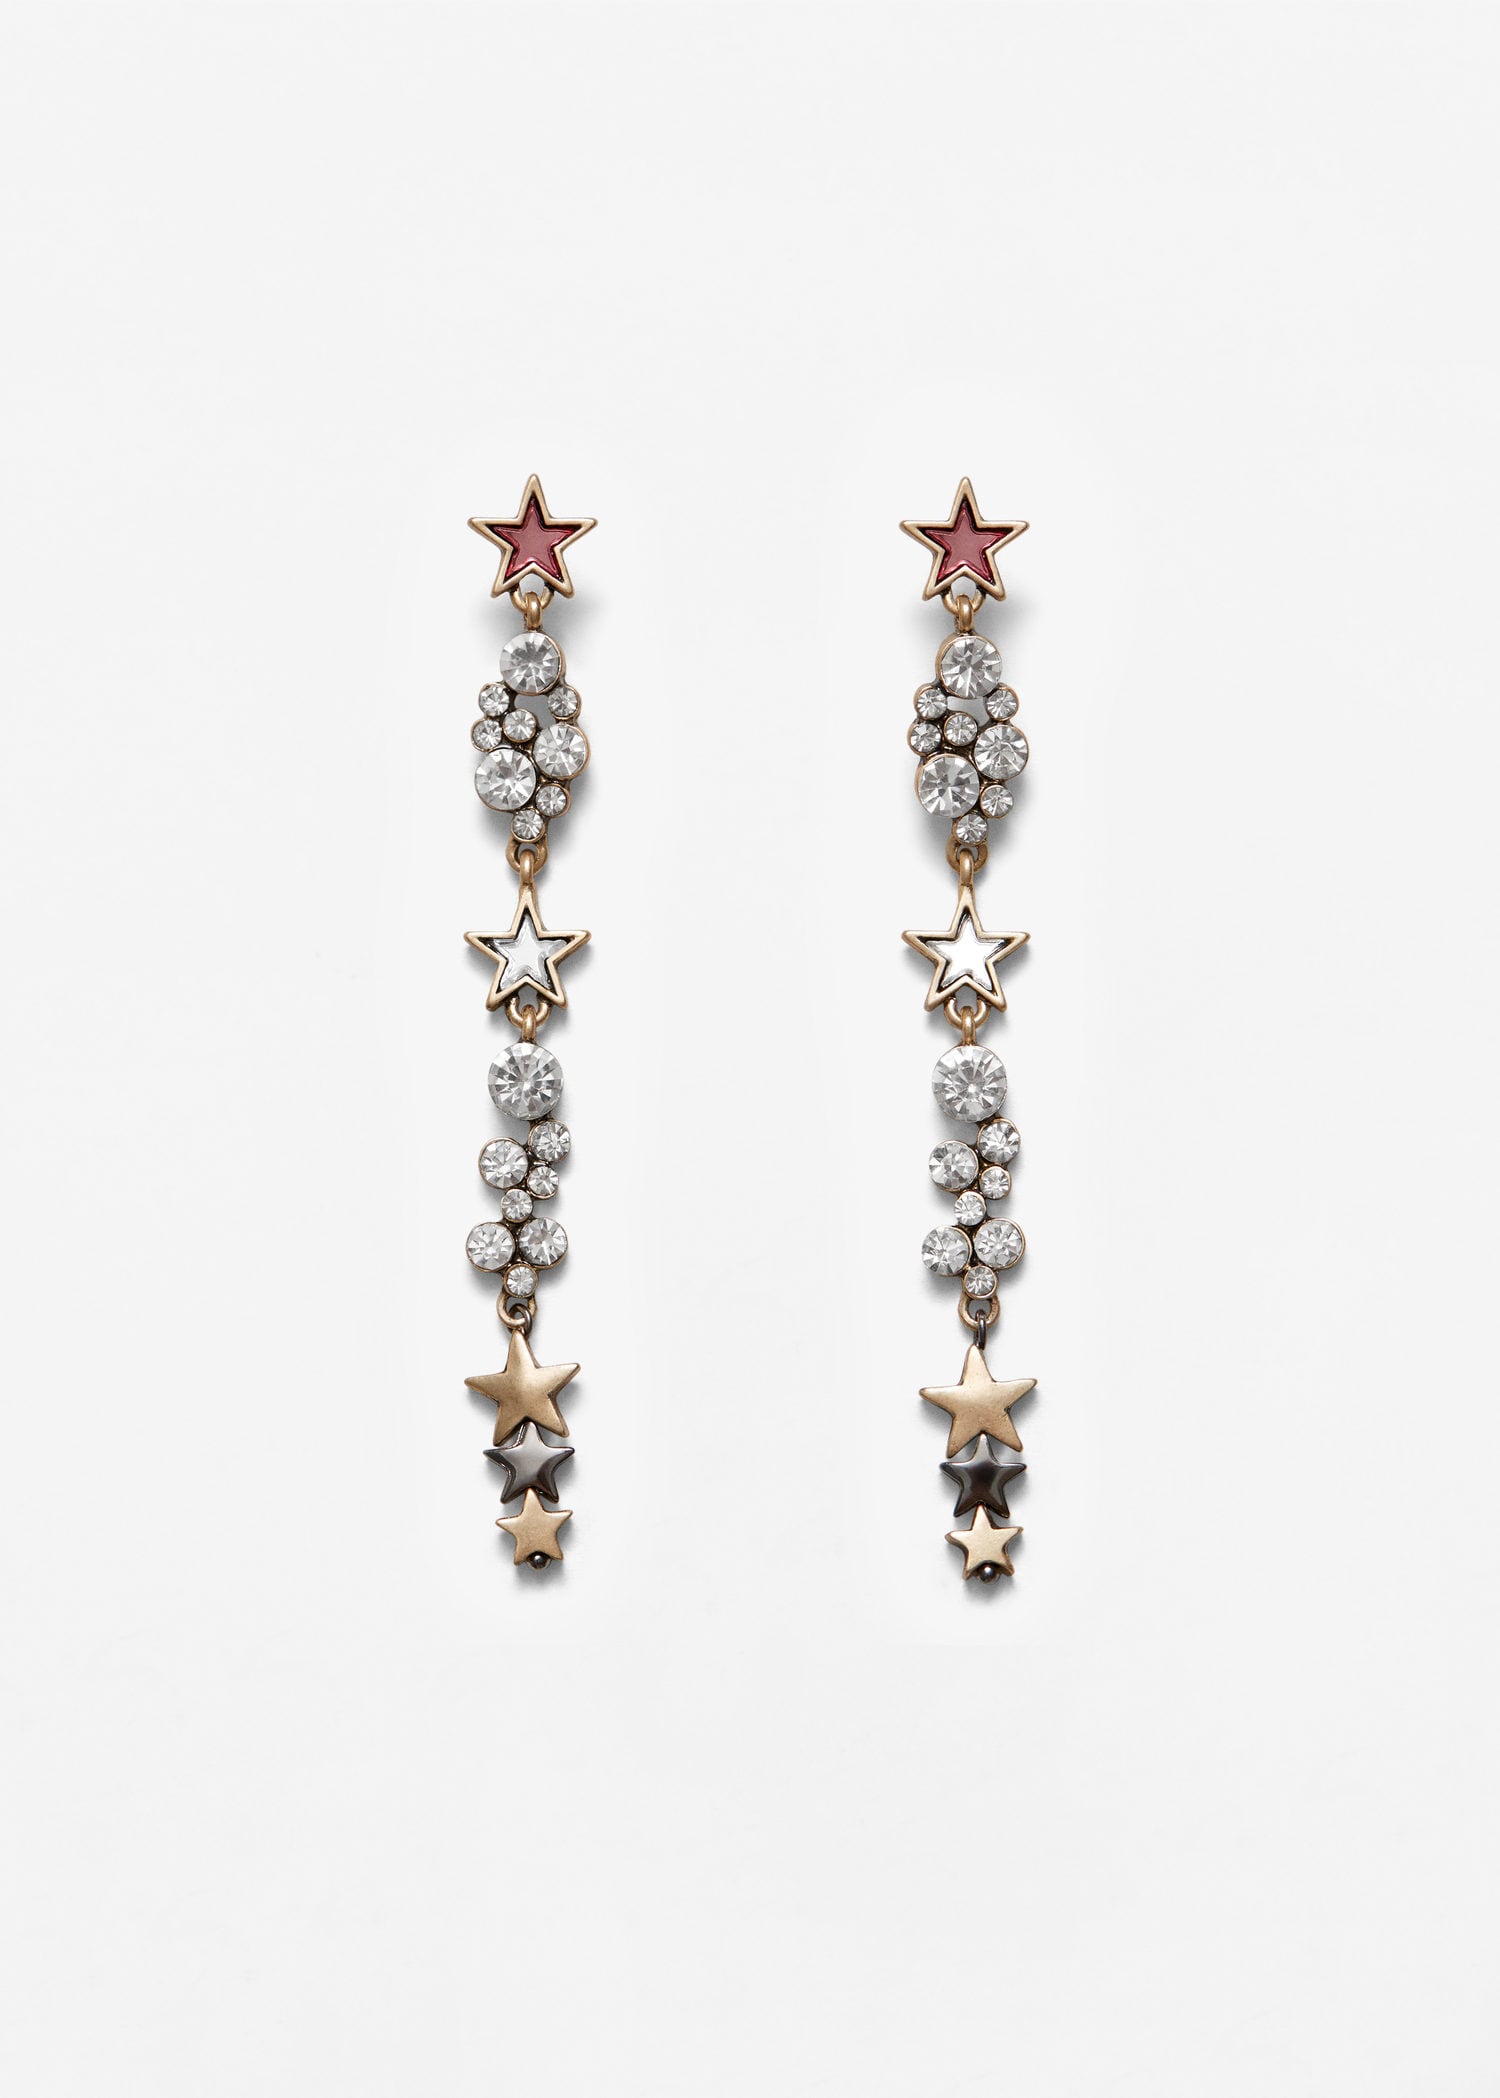 Trend Report: Statement Earrings | Love Daily Dose